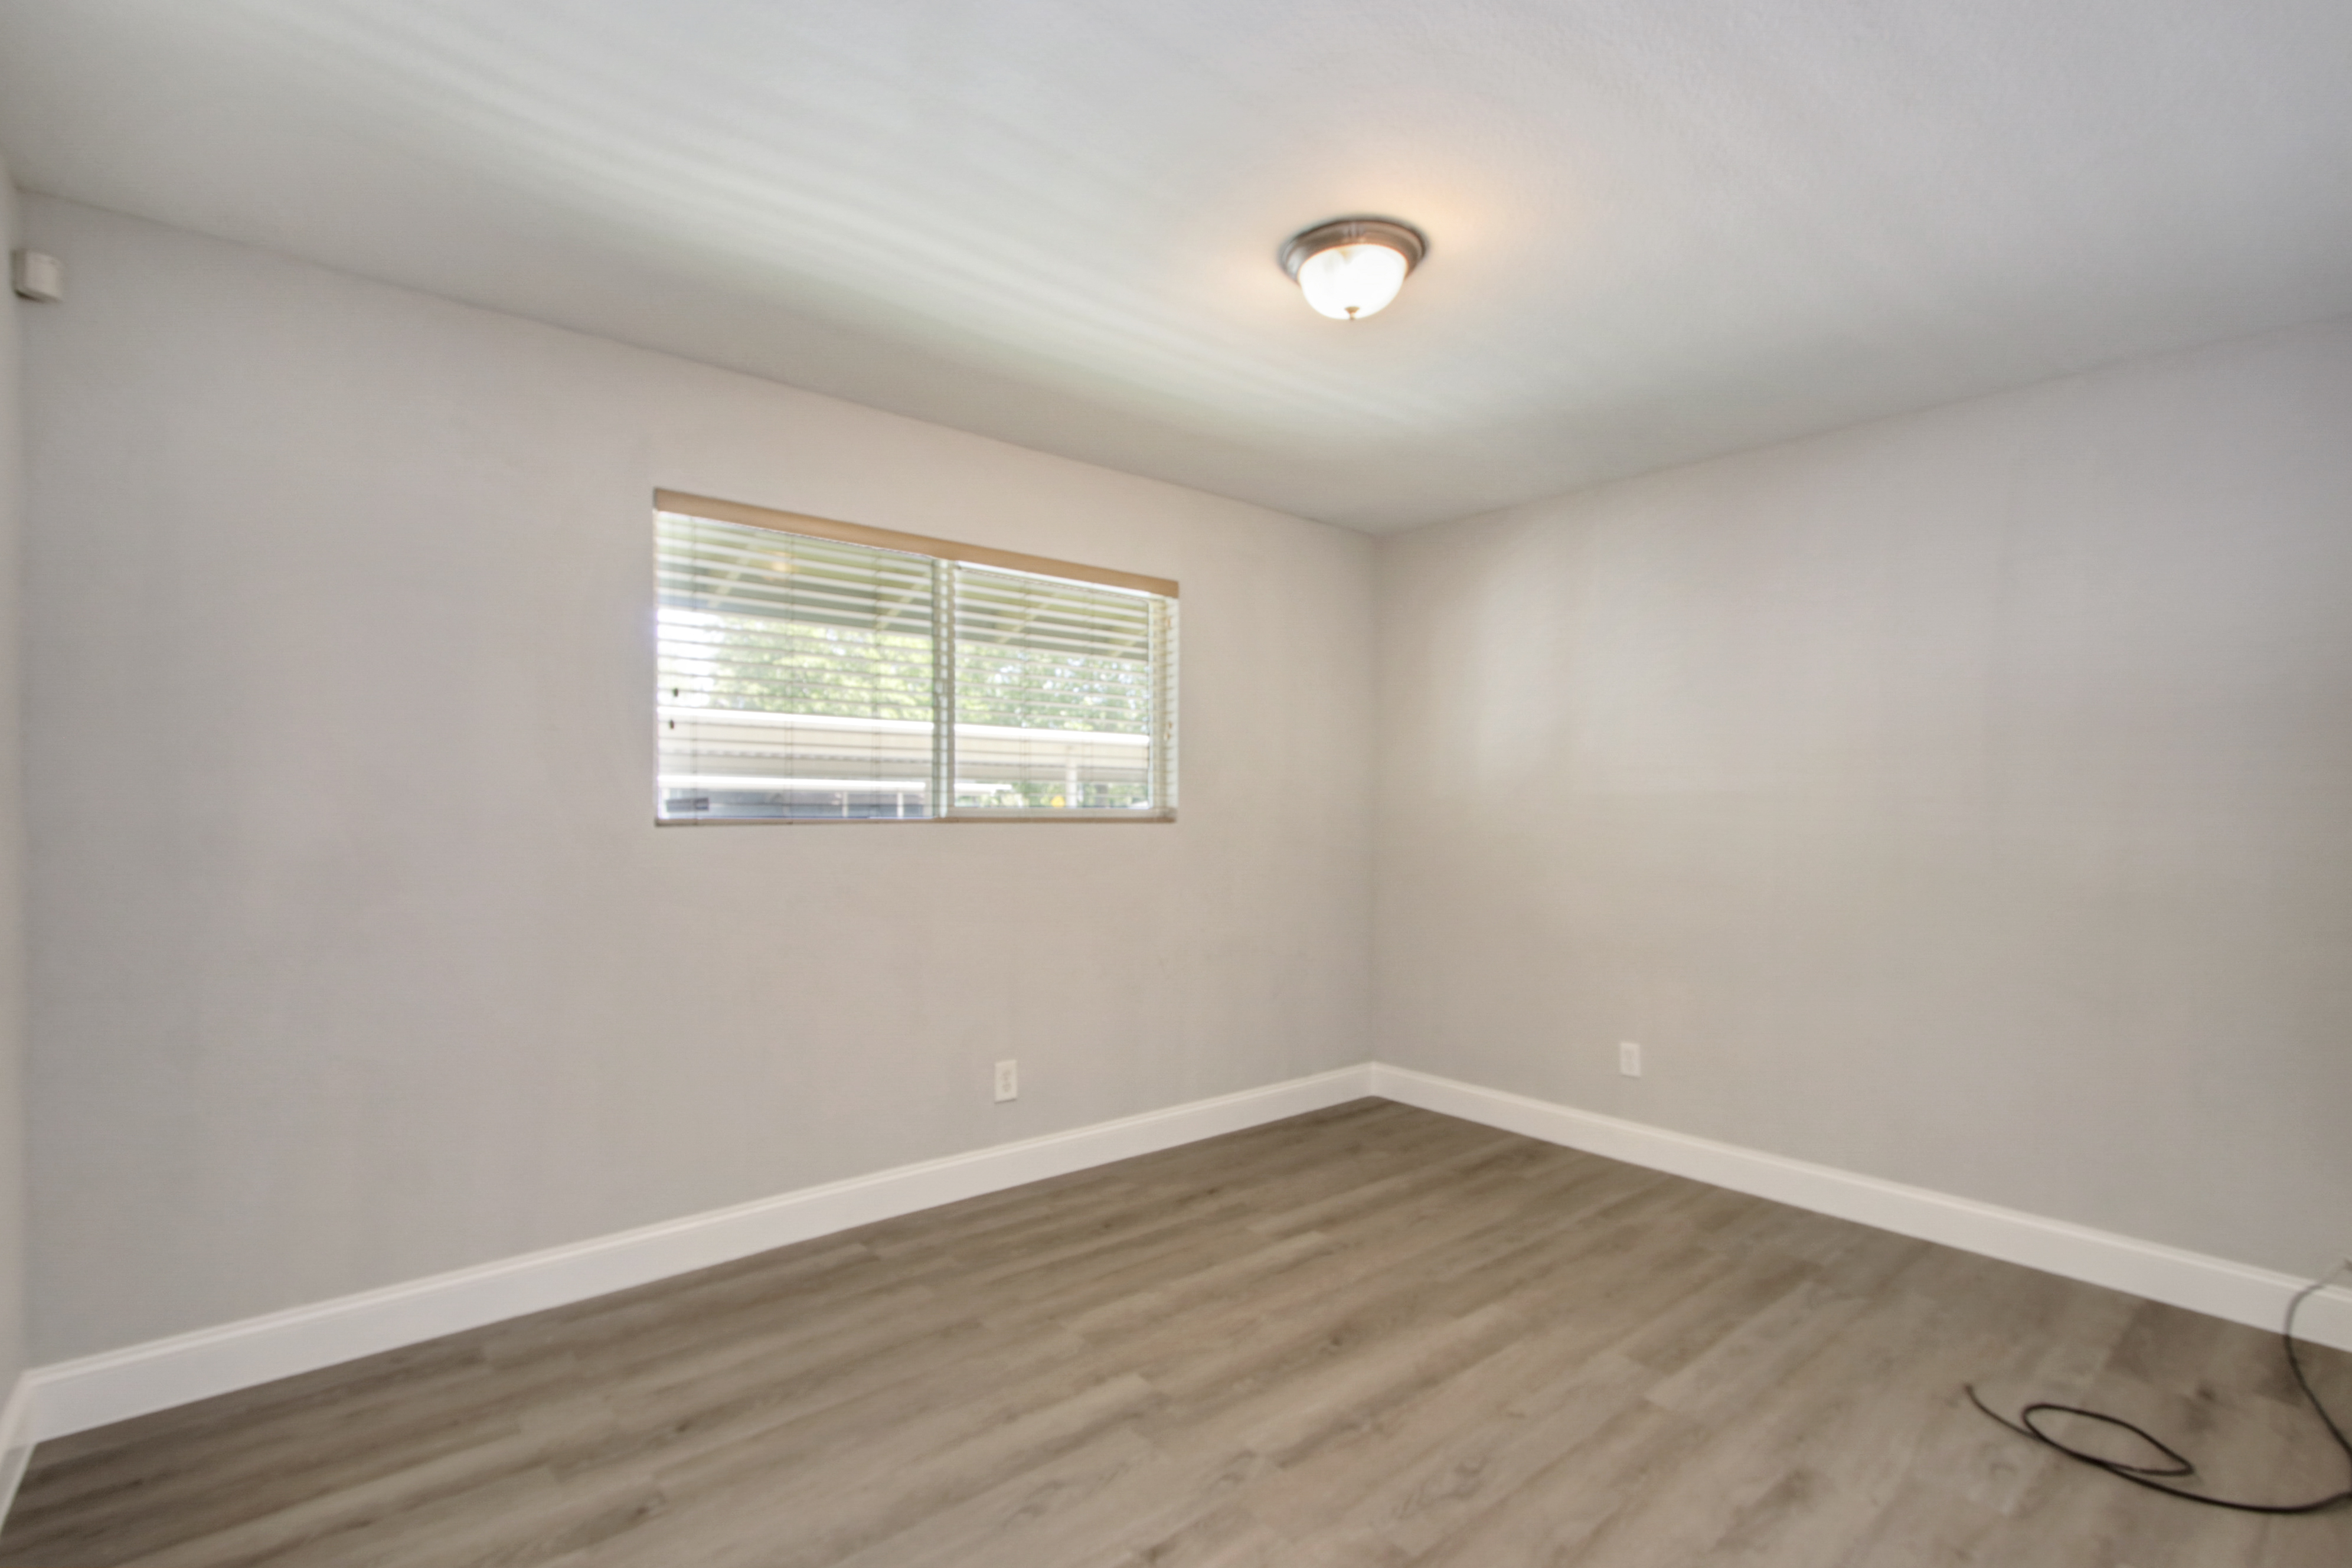 5001 Bremner Lane Unit 1 - Sacramento  -  presented by James Tan MBA Broker/Realtor - Bethany Real Estate and Investments - One of the best real estate agent in Elk Grove